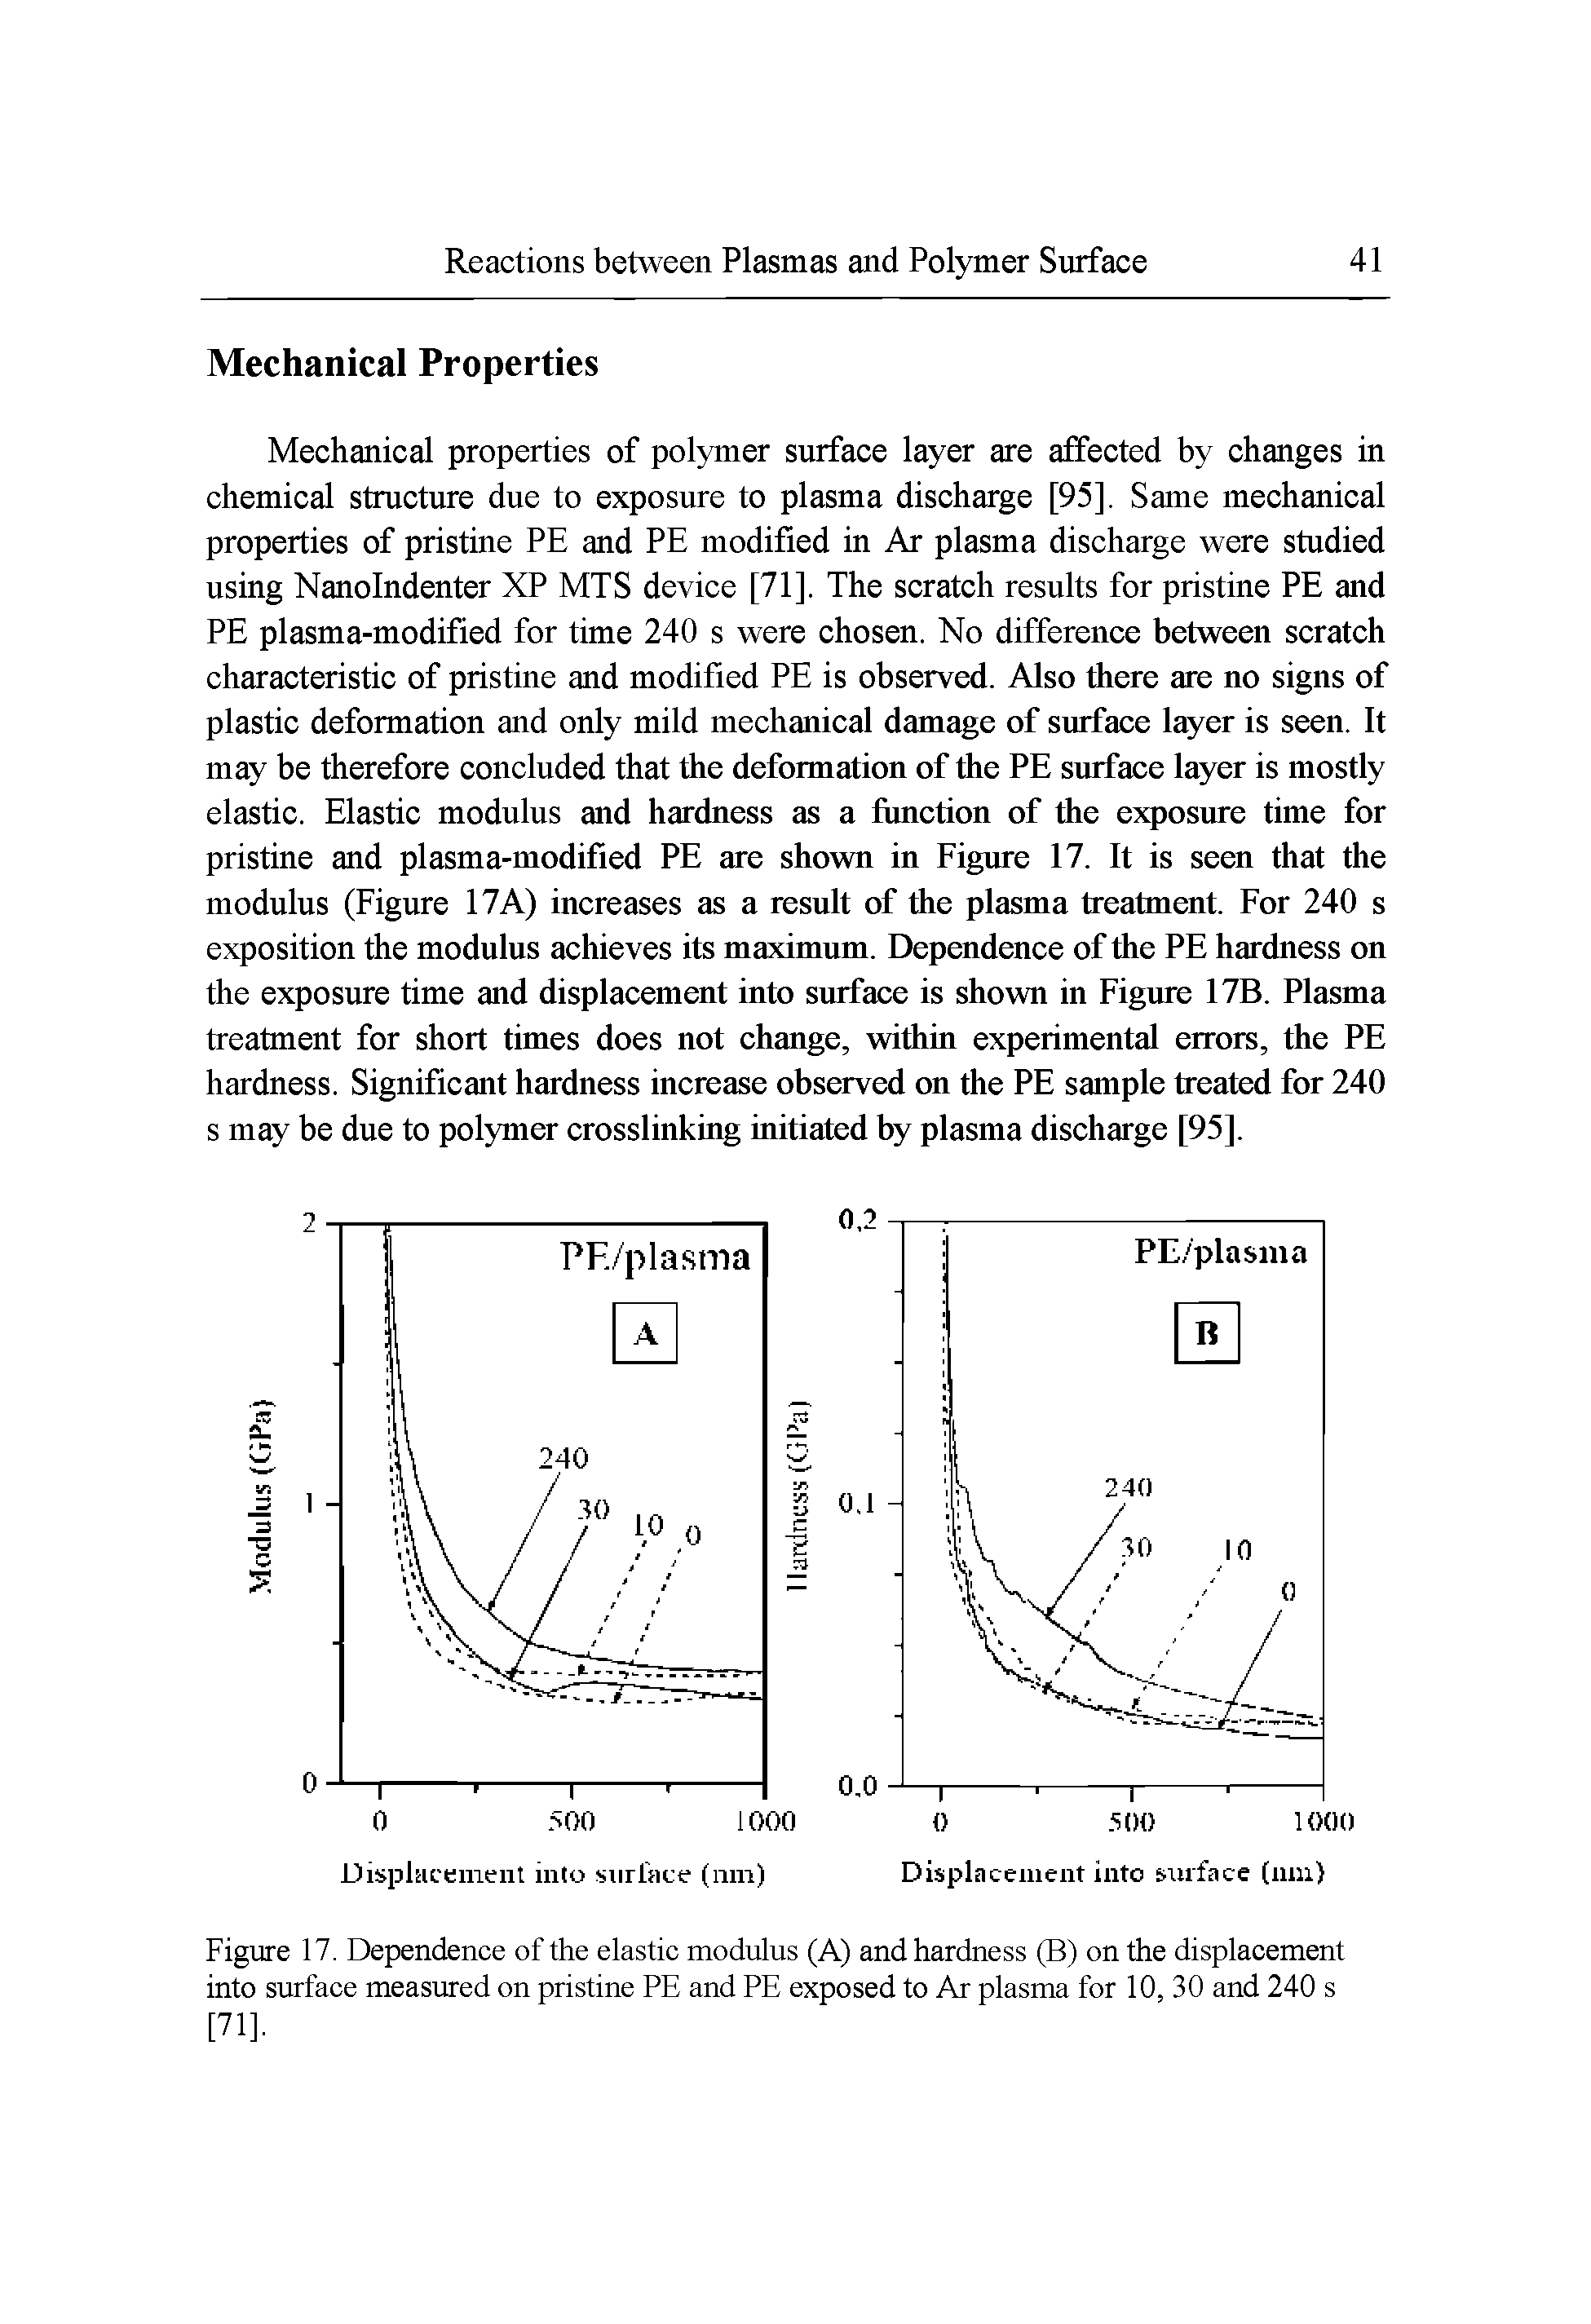 Figure 17. Dependence of the elastic modulus (A) and hardness (B) on the displacement into surface measured on pristine PE and PE exposed to Ar plasma for 10, 30 and 240 s [71].